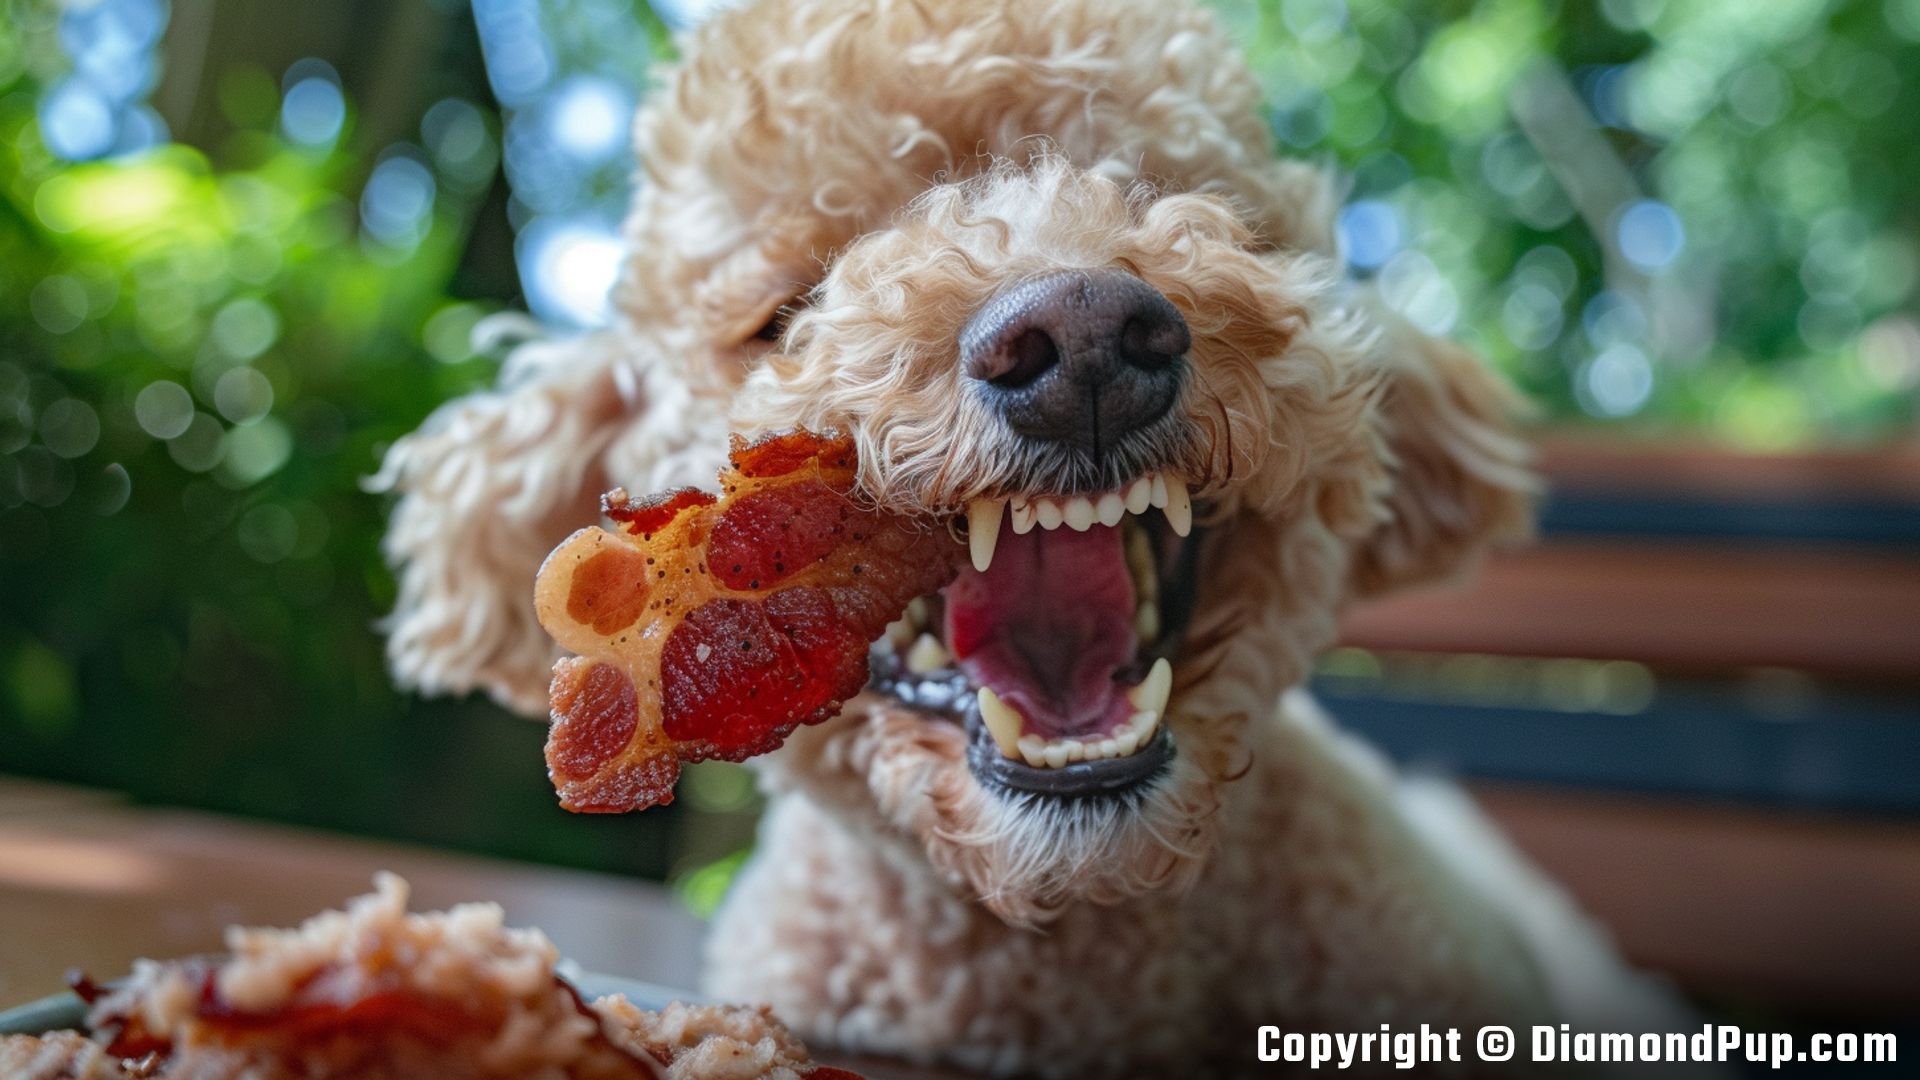 Photograph of Poodle Eating Bacon